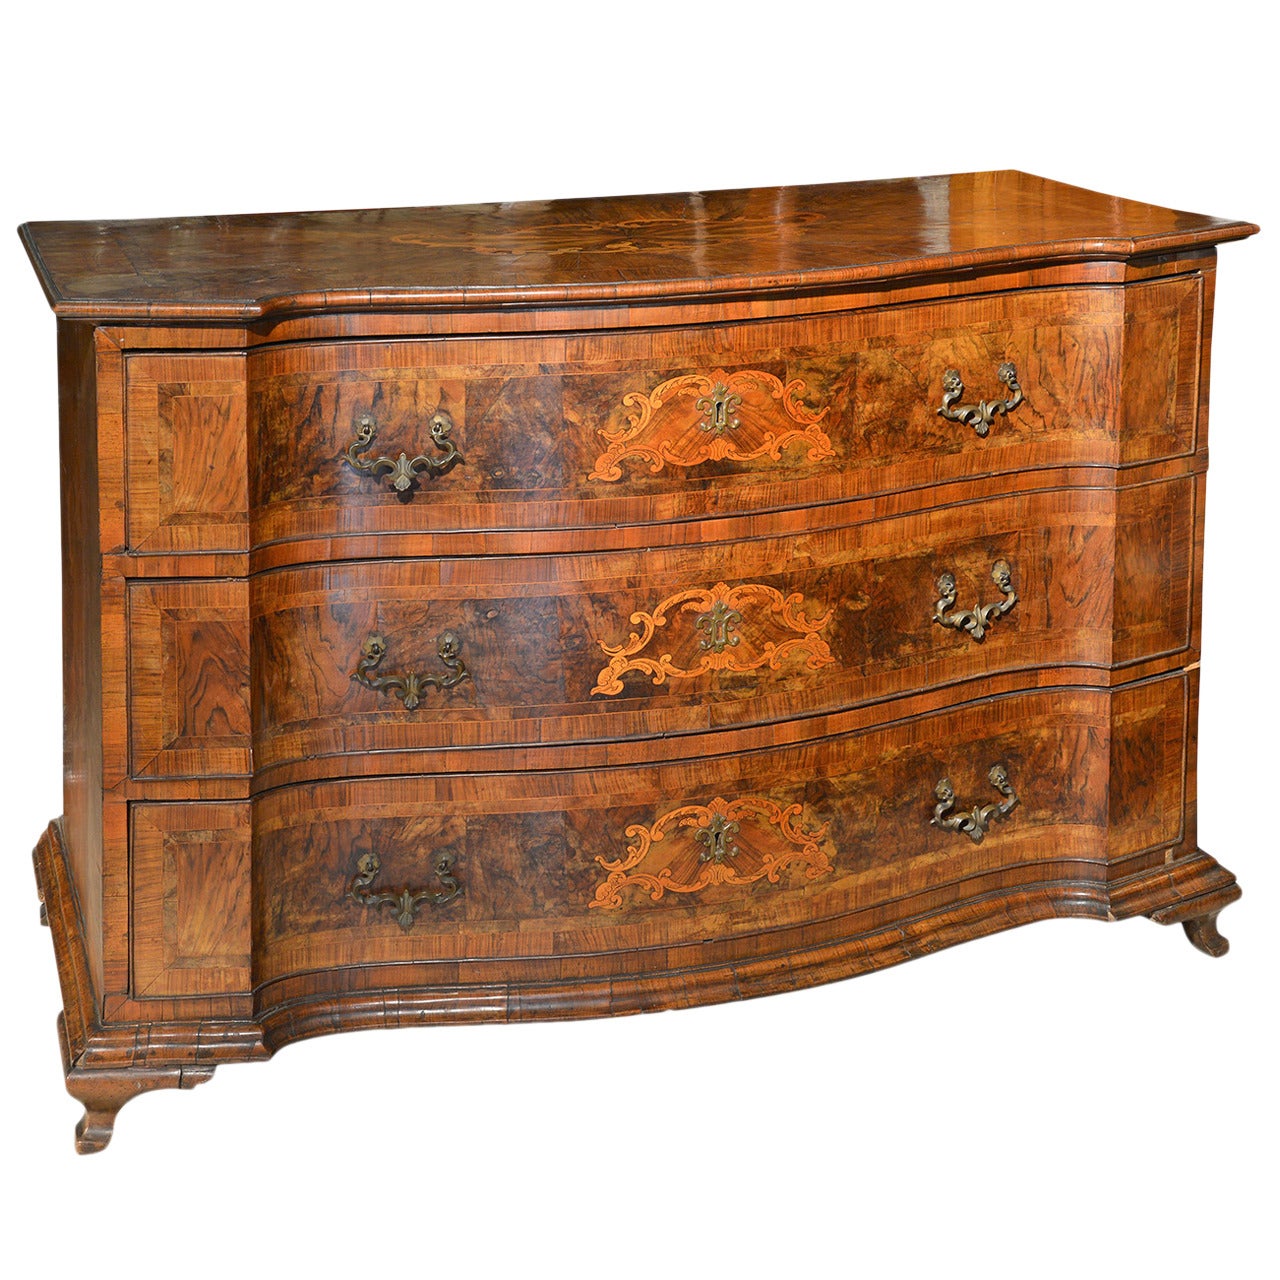 Very Fine Italian Chest of Drawers, Mid-18th Century For Sale